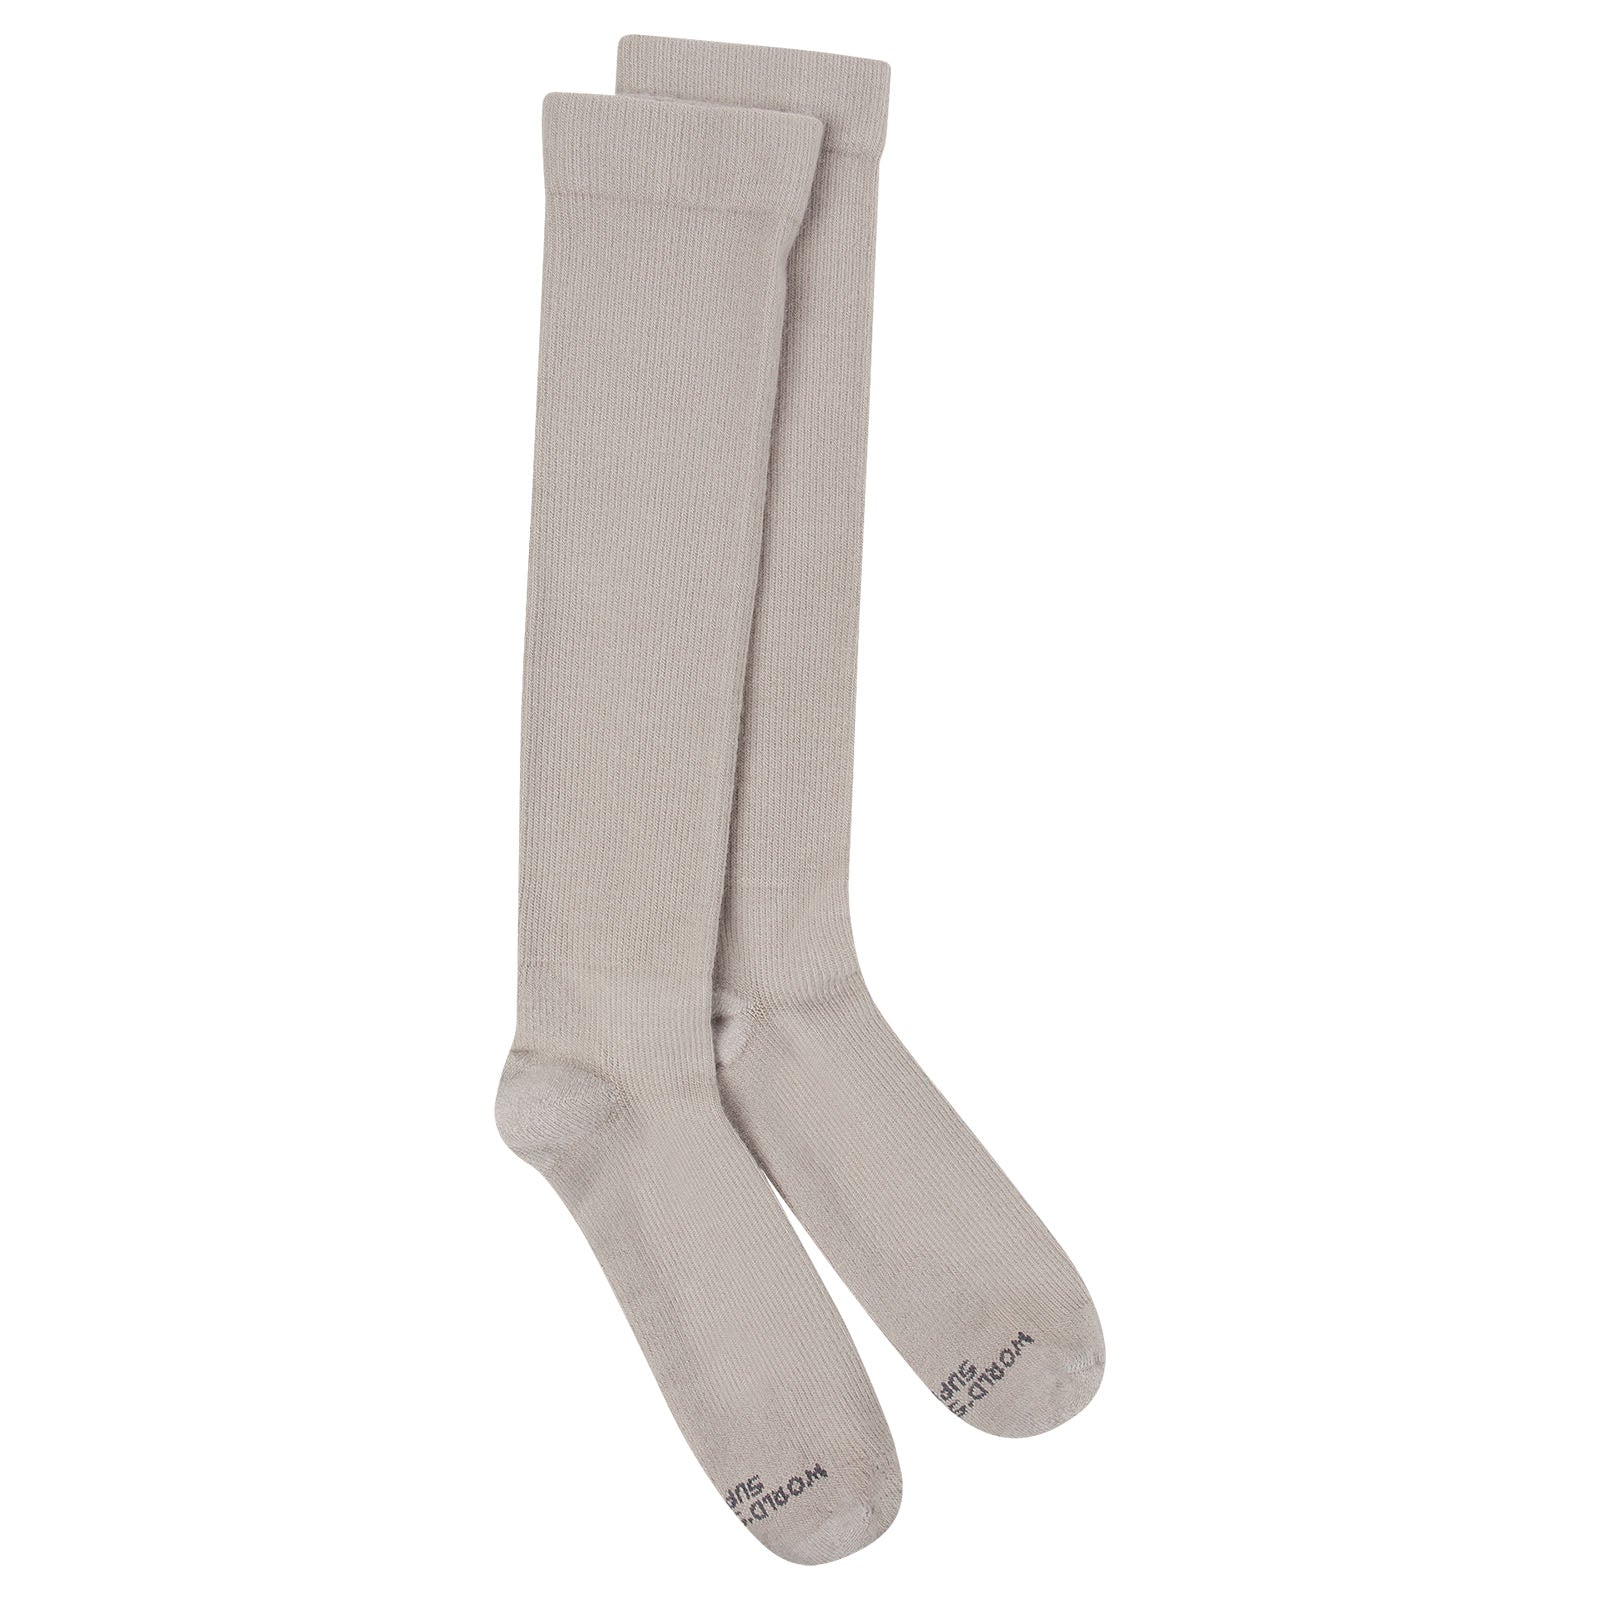 Sensitive Support Fit Fashion Knee-high Stone